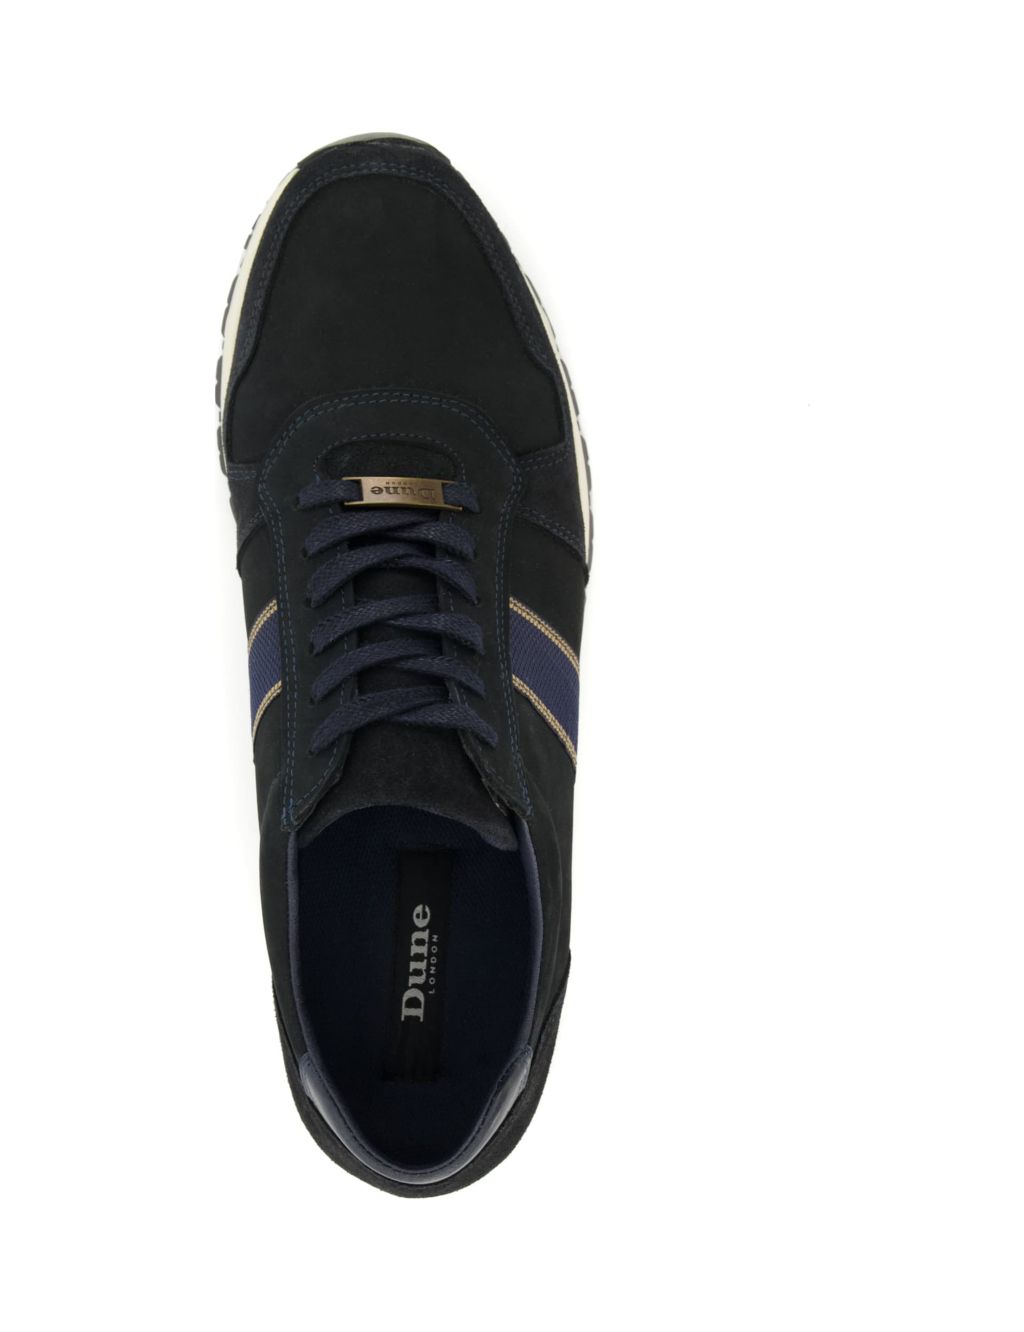 Leather Lace Up Stripe Trainers image 3